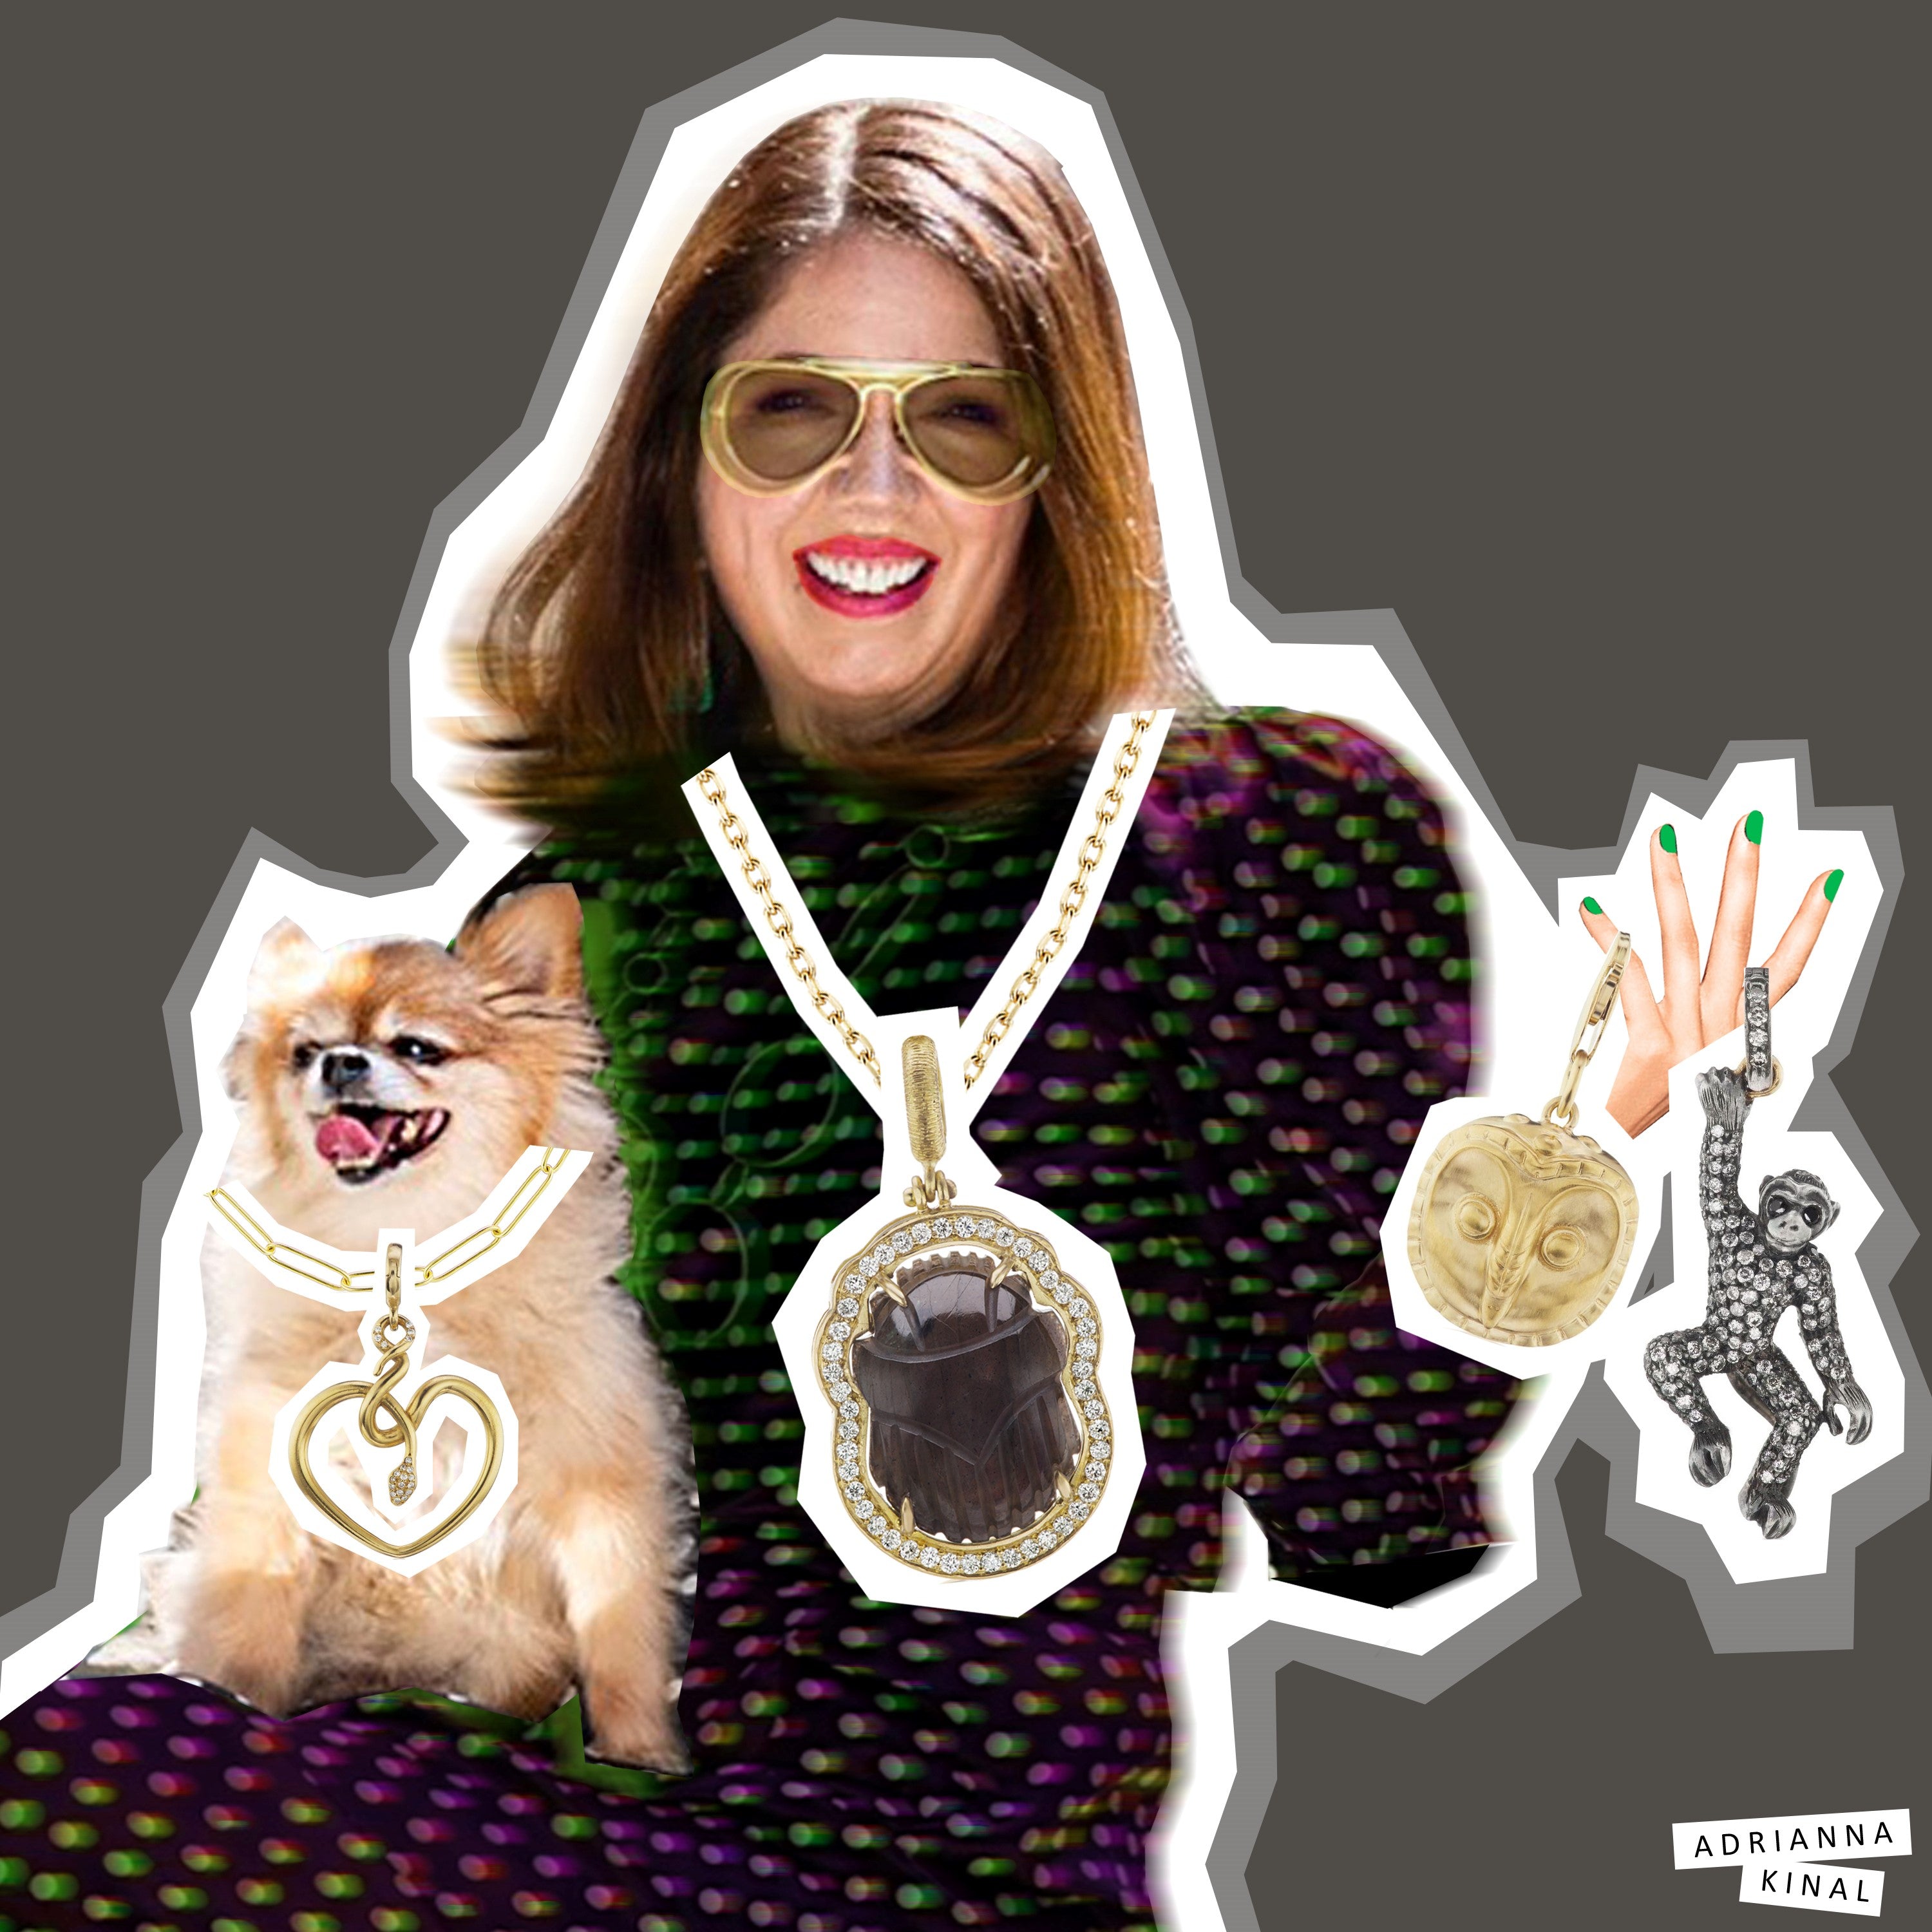 Marion Fasel with her dog and jewelry.